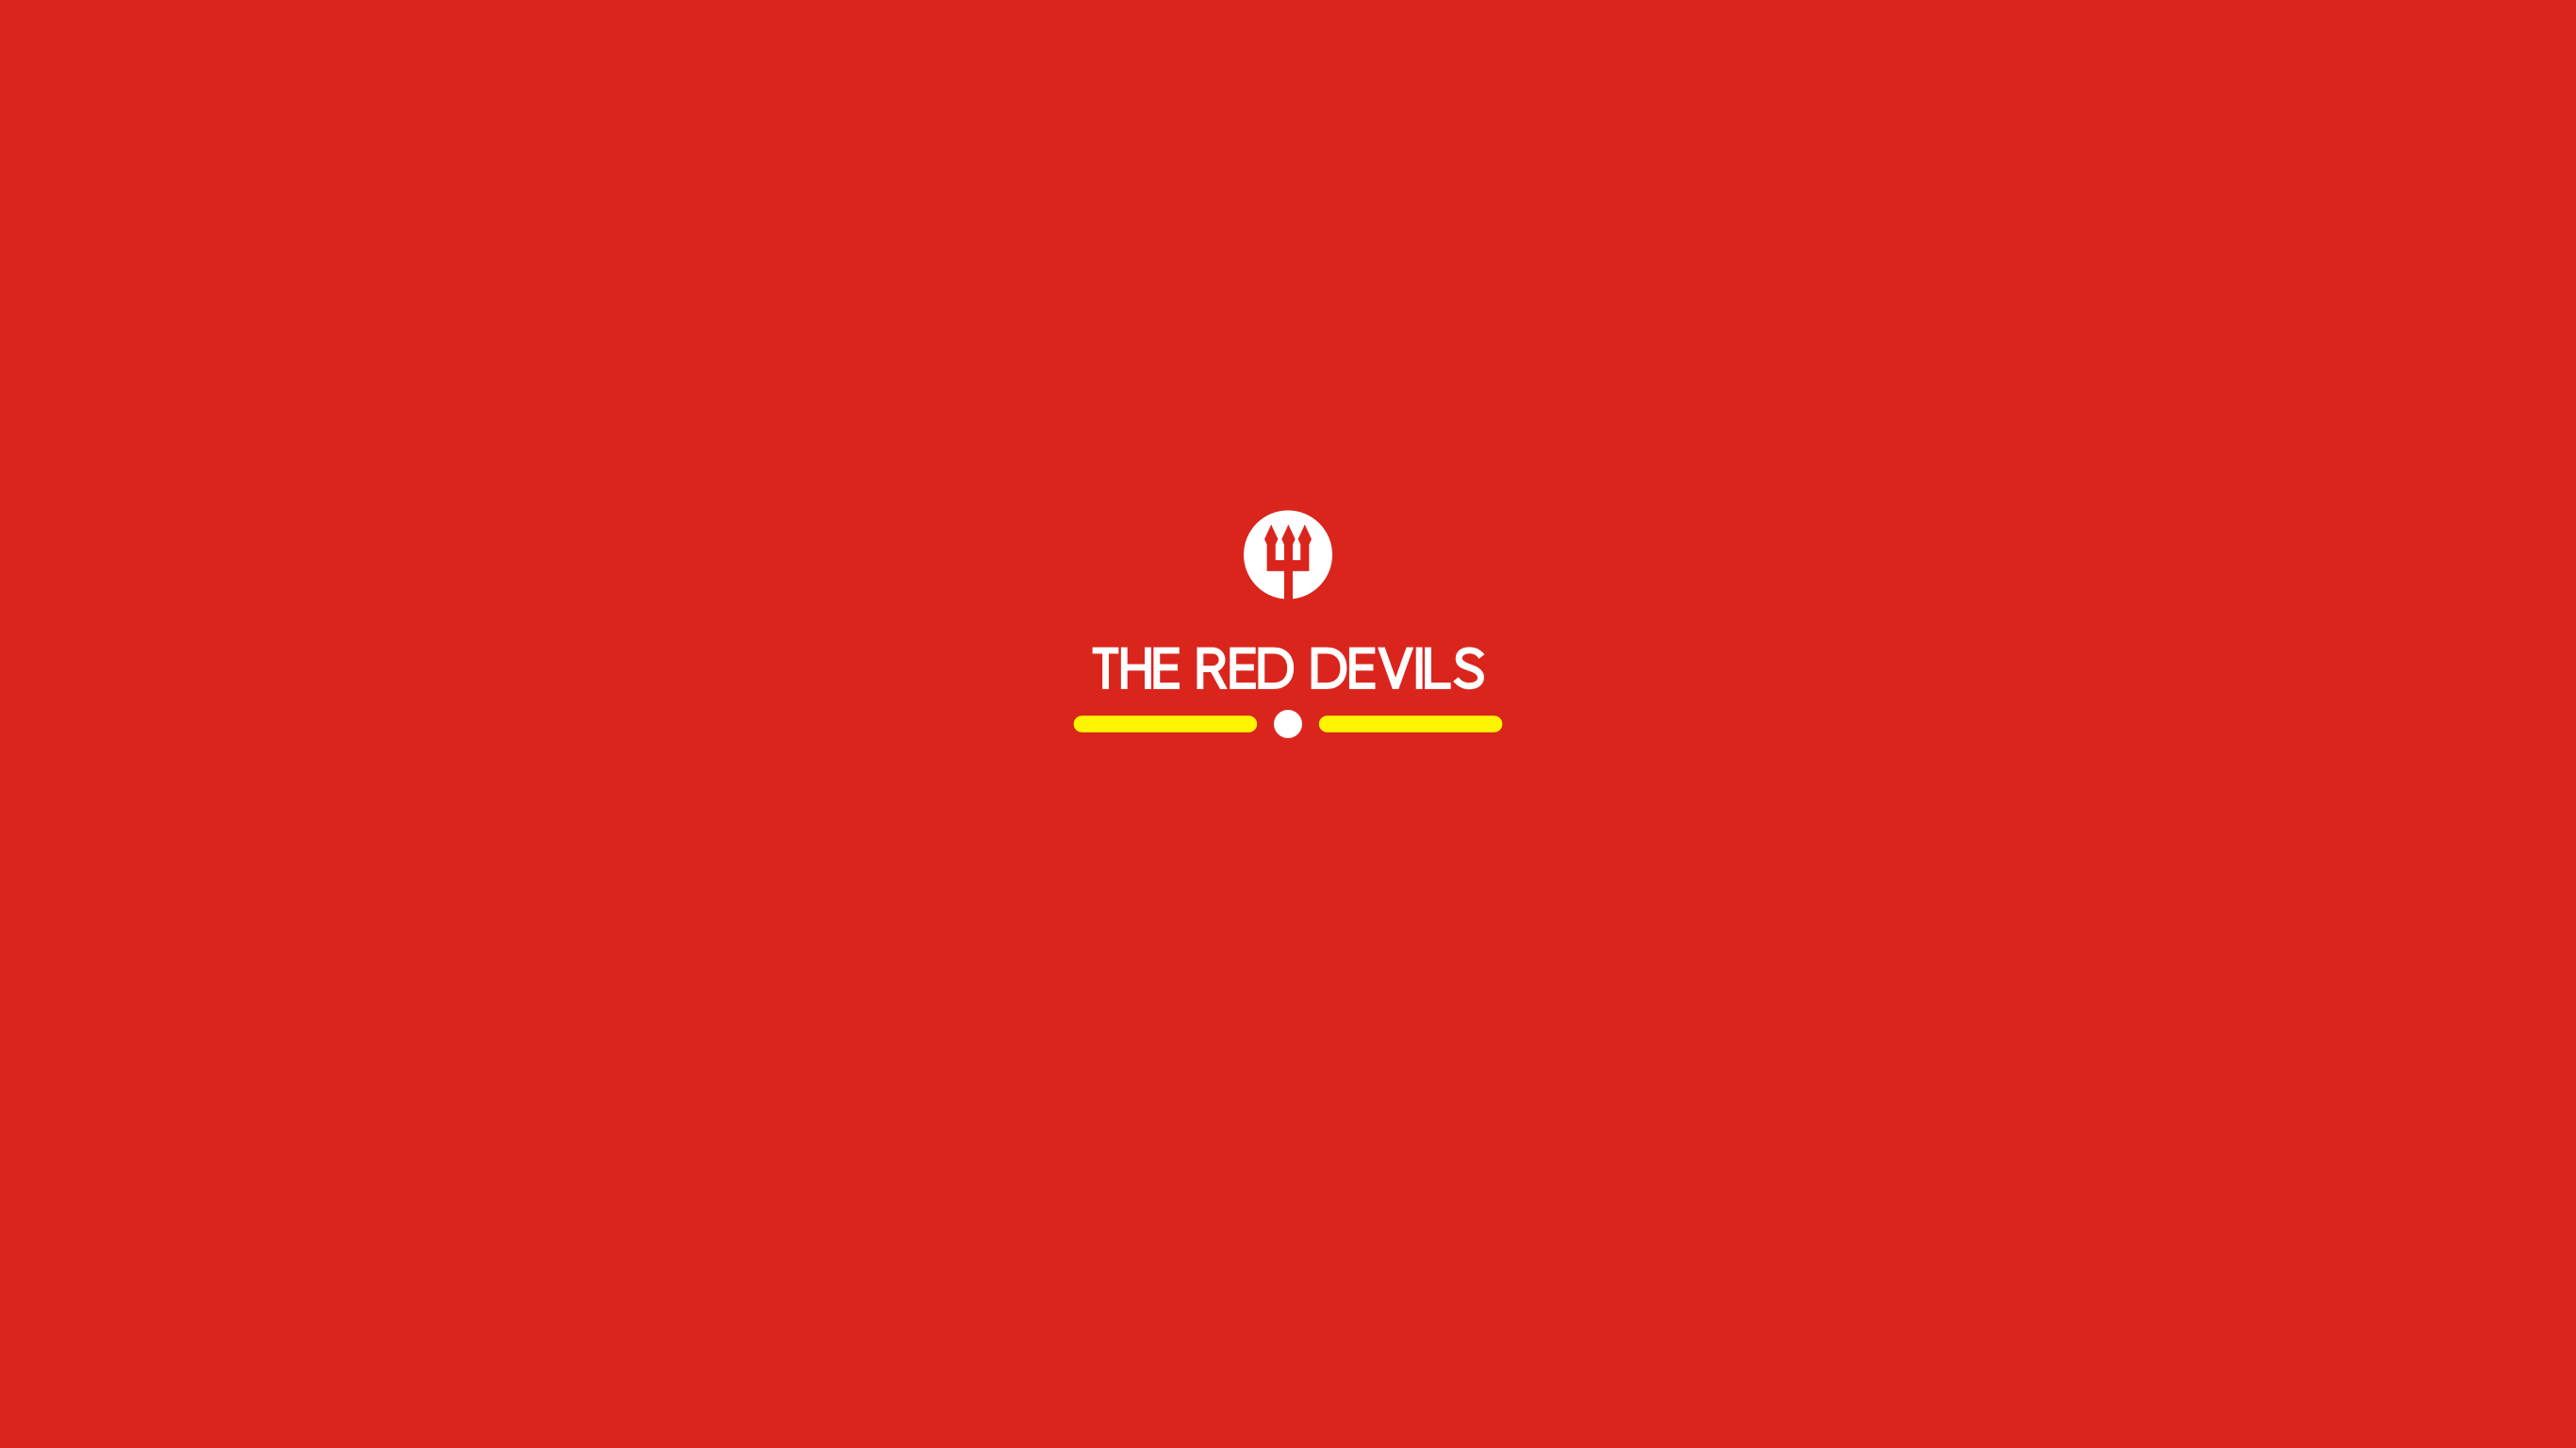 The Red Devils, simple Manchester United wallpaper